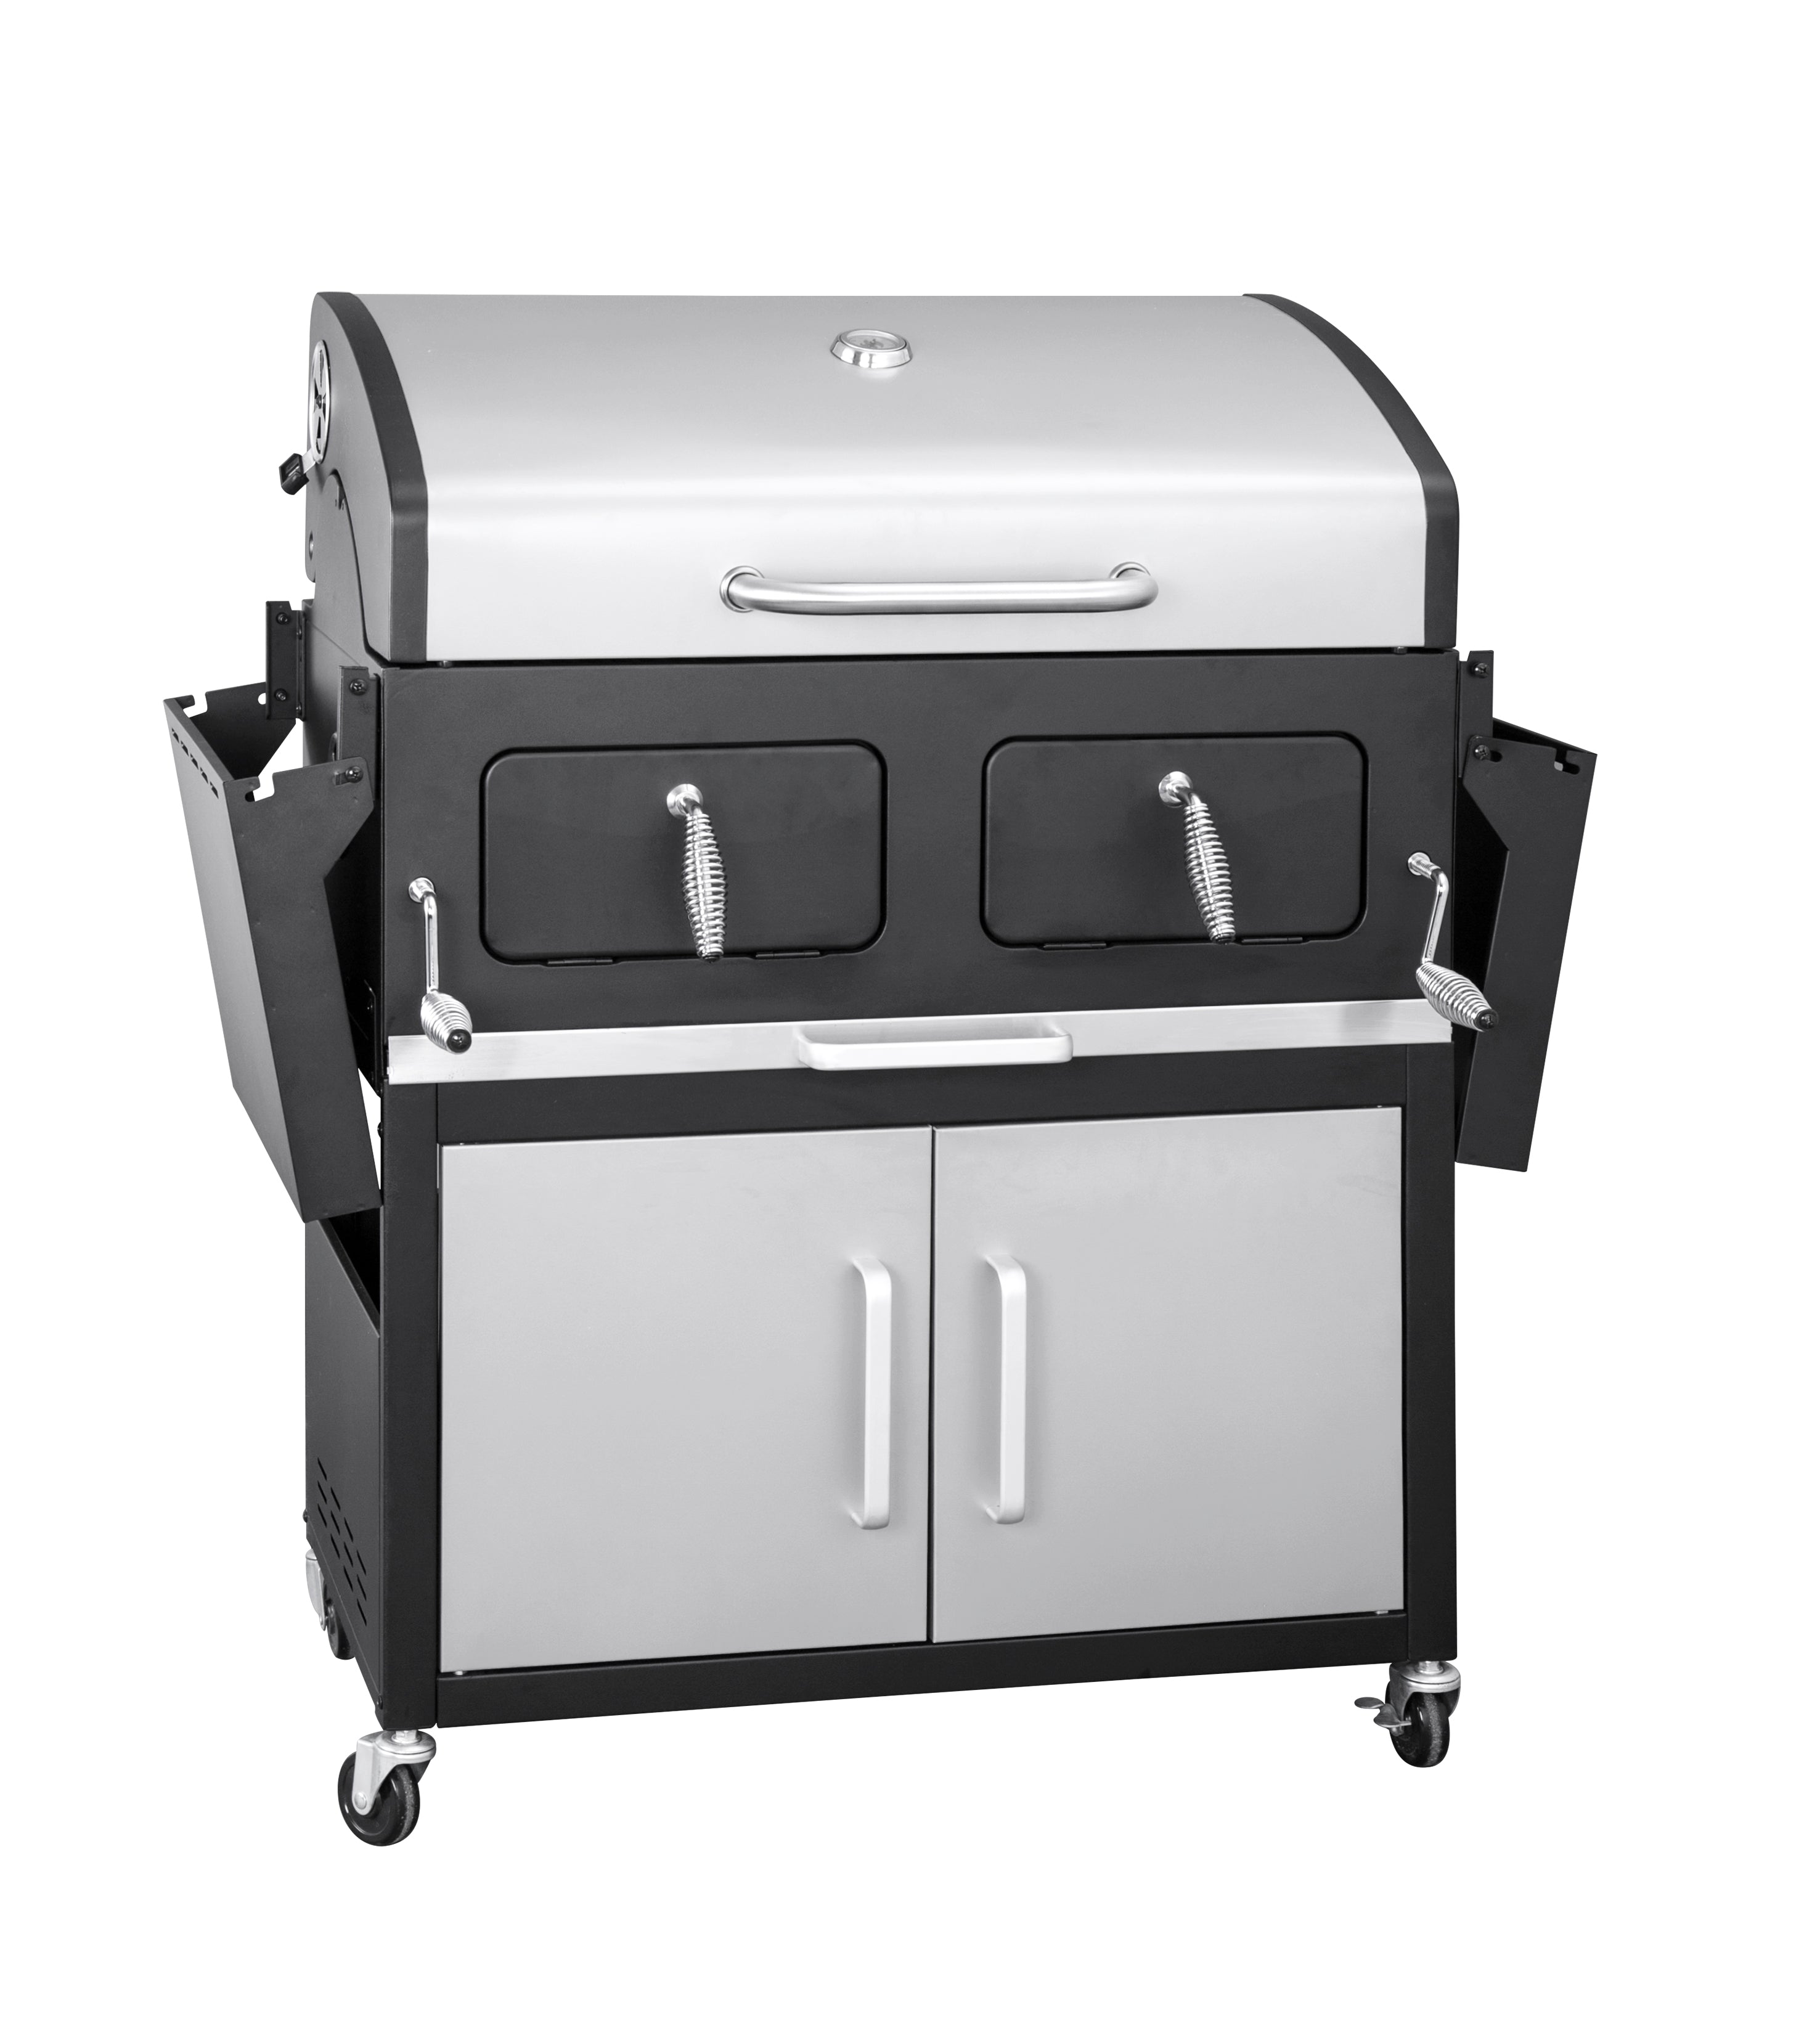 Grand XXL Broiler Charcoal BBQ- Silver & Weatherproof cover